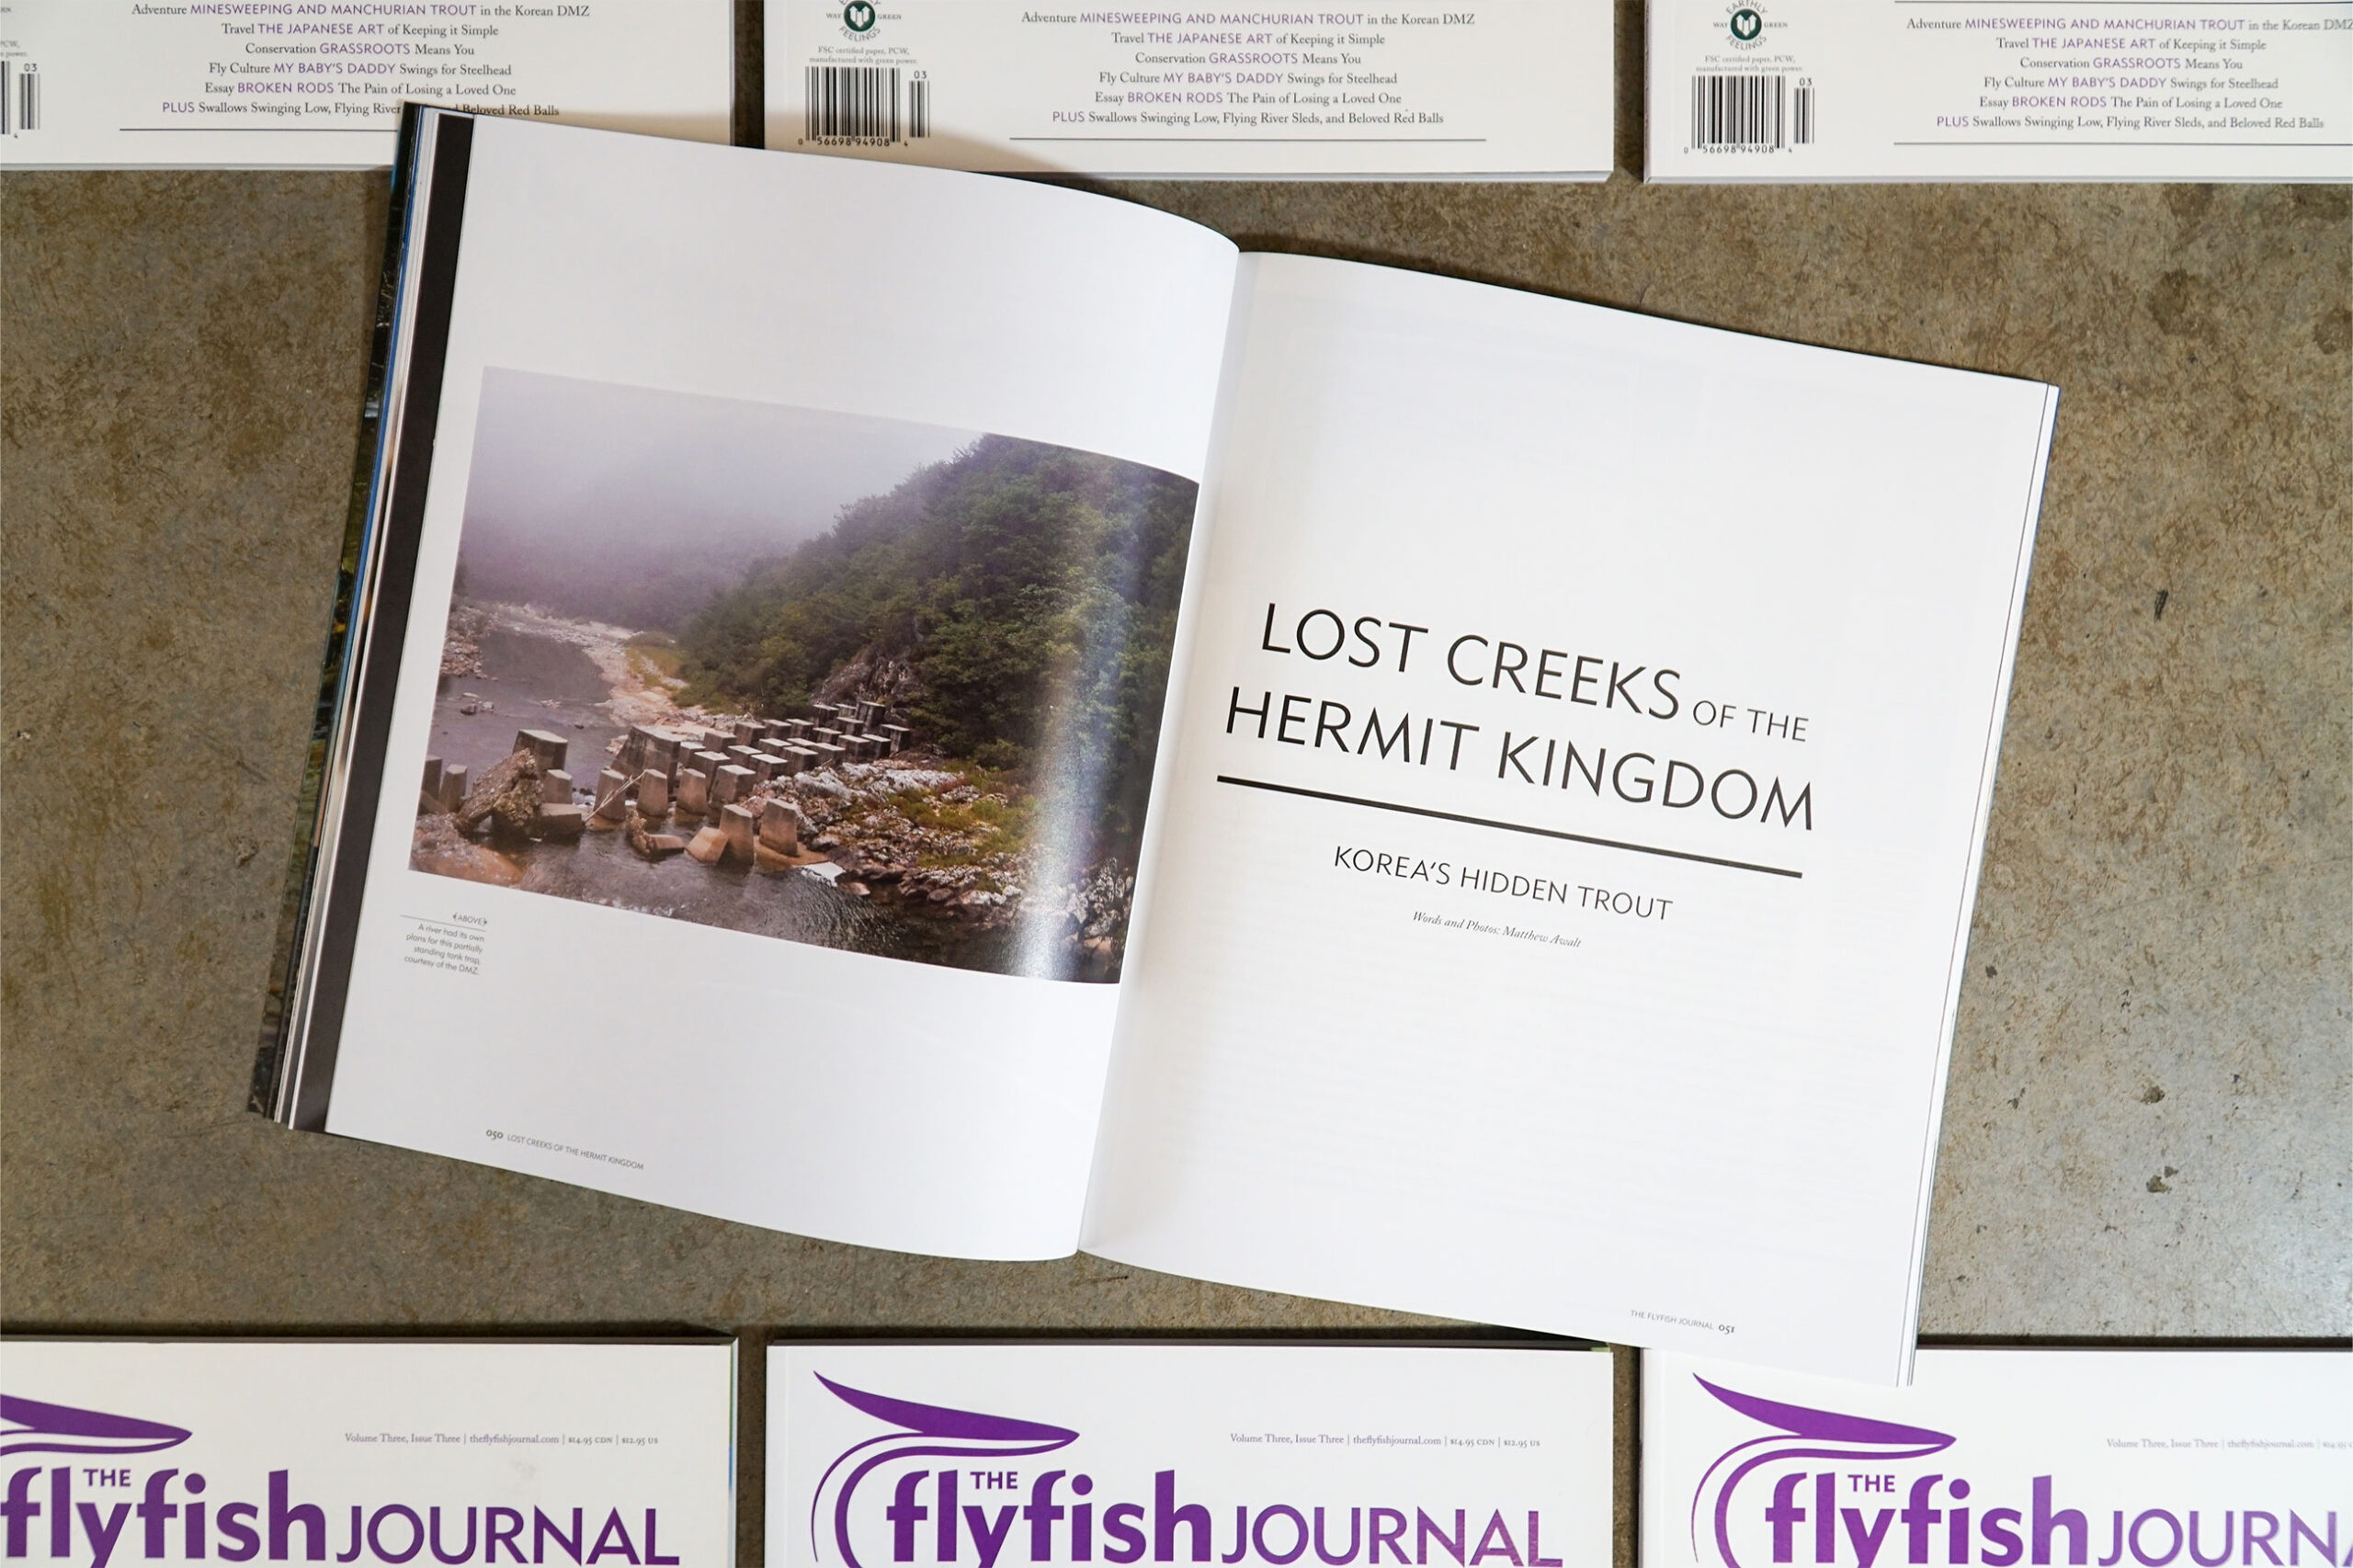 The Flyfish Journal Volume 3 Issue 3 Feature Lost Creeks of the Hermit Kingdom